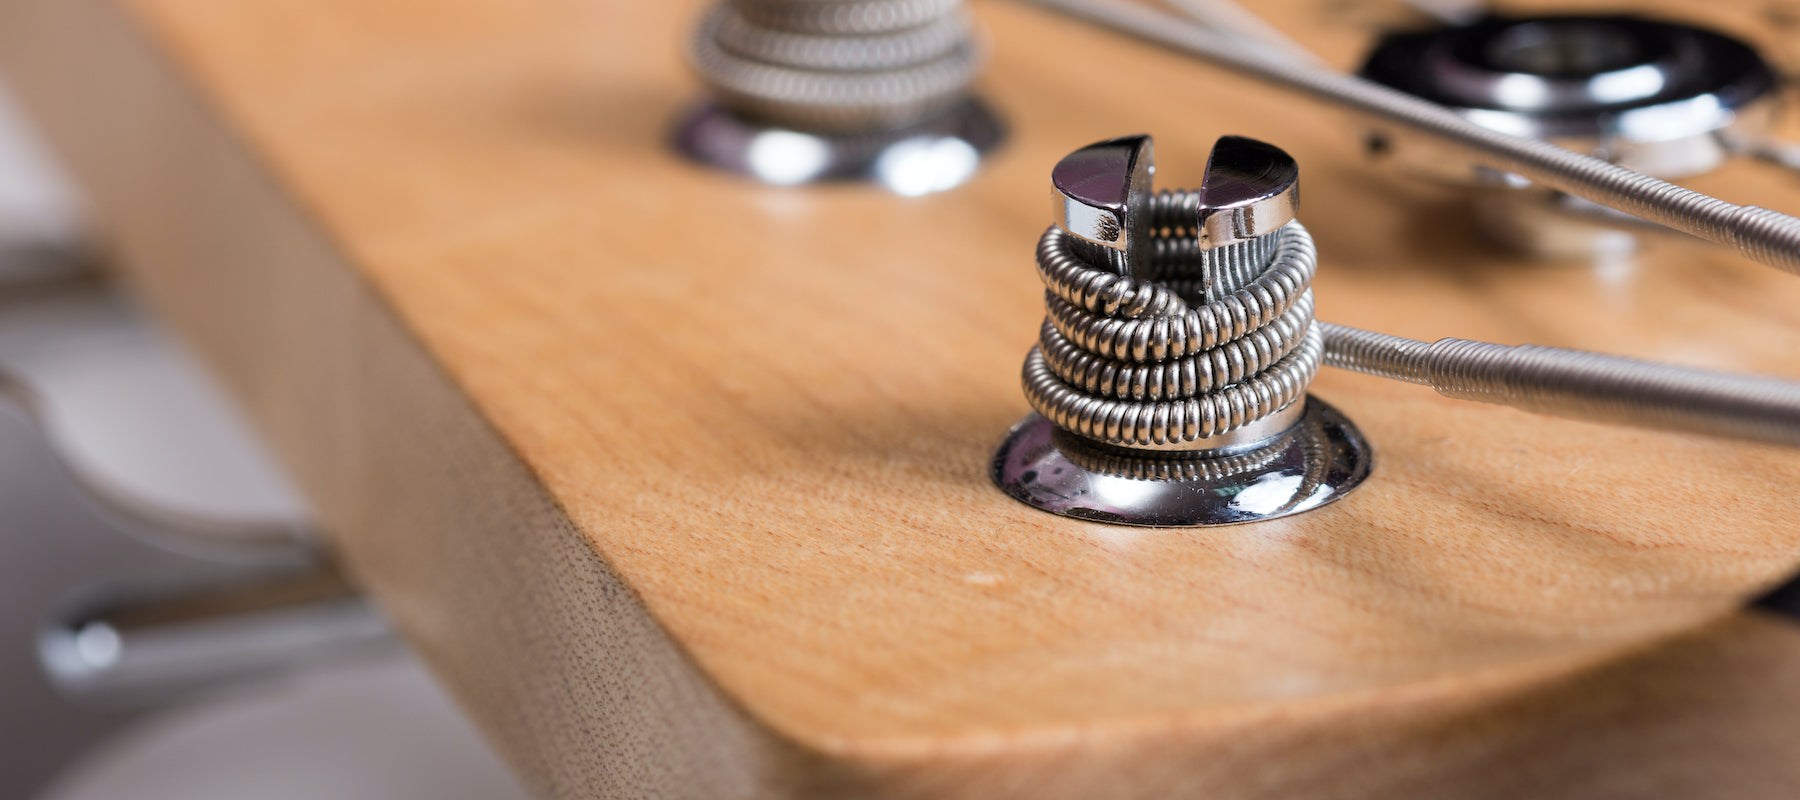 Photo of a Tuner Post holding strings on a bass headstock